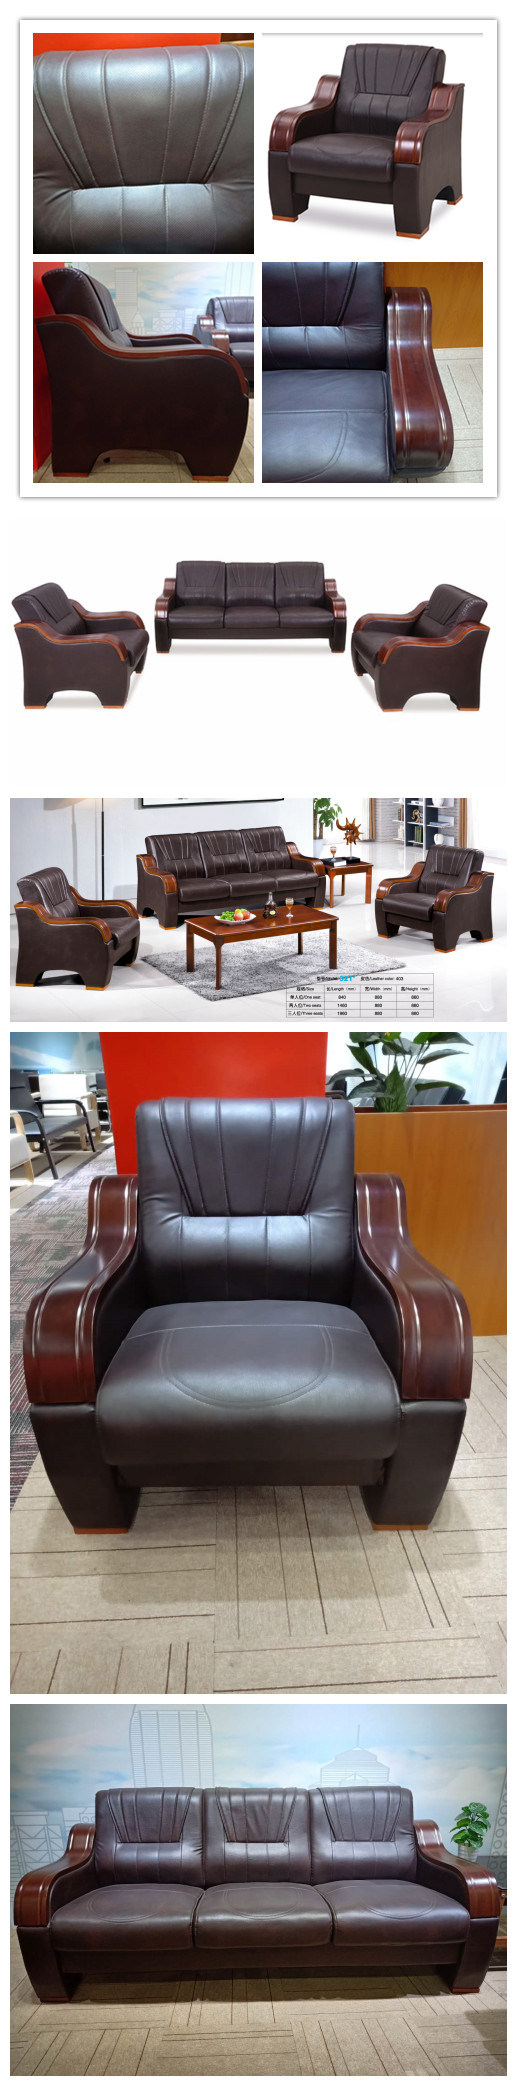 Leisure Popular Classical Hotel Chair Office Leather Sofa with Wooden Armrest 1+1+3 in Stock